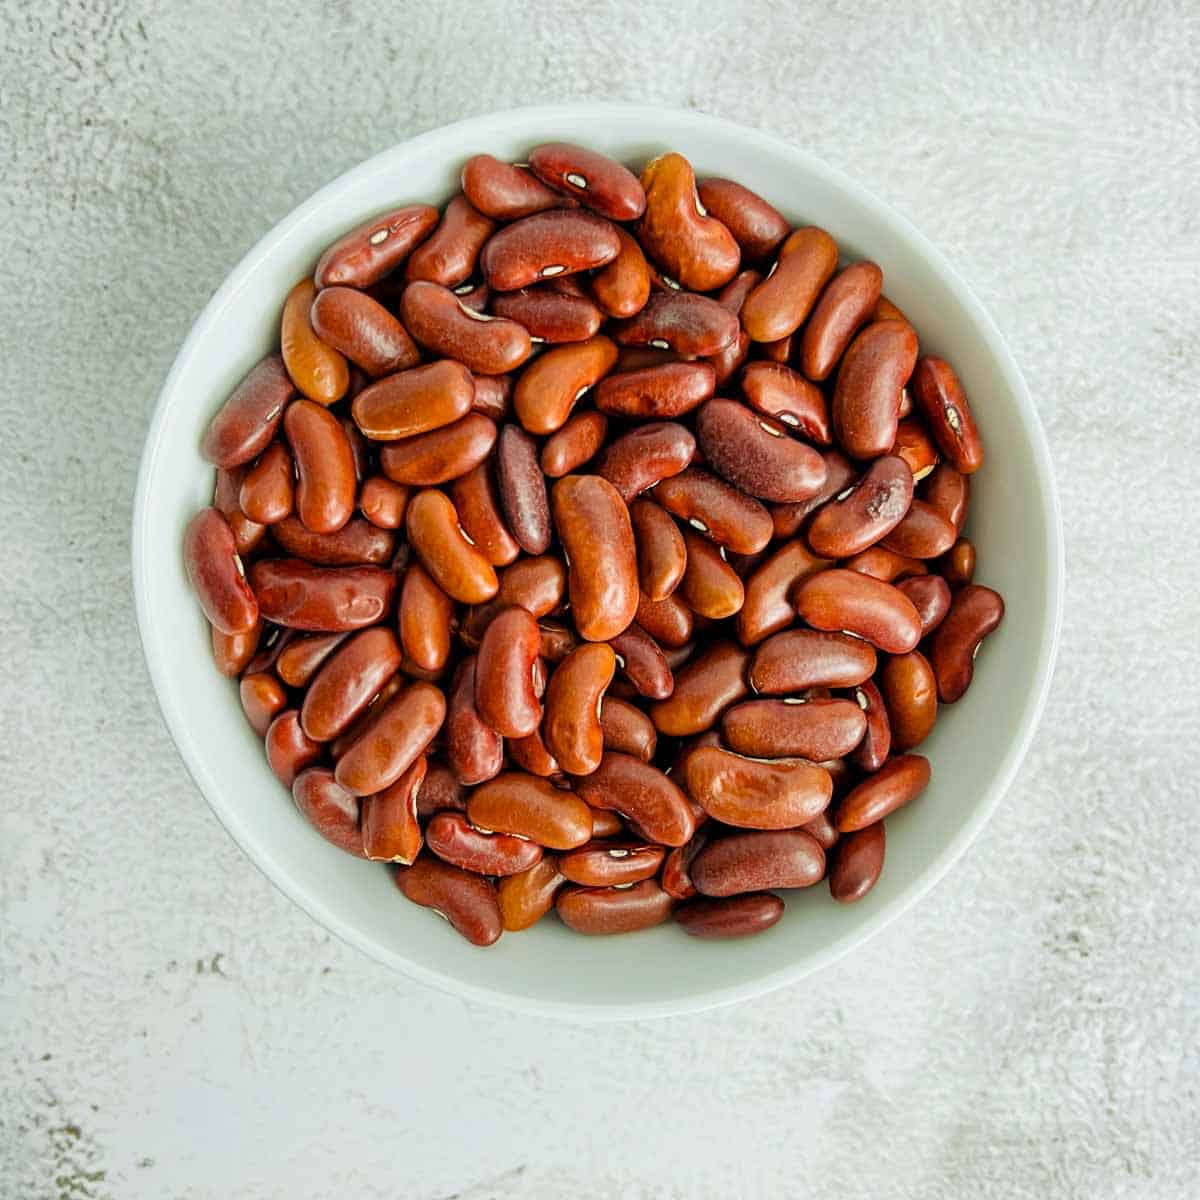 Dried kidney beans in a white bowl placed on a white surface.